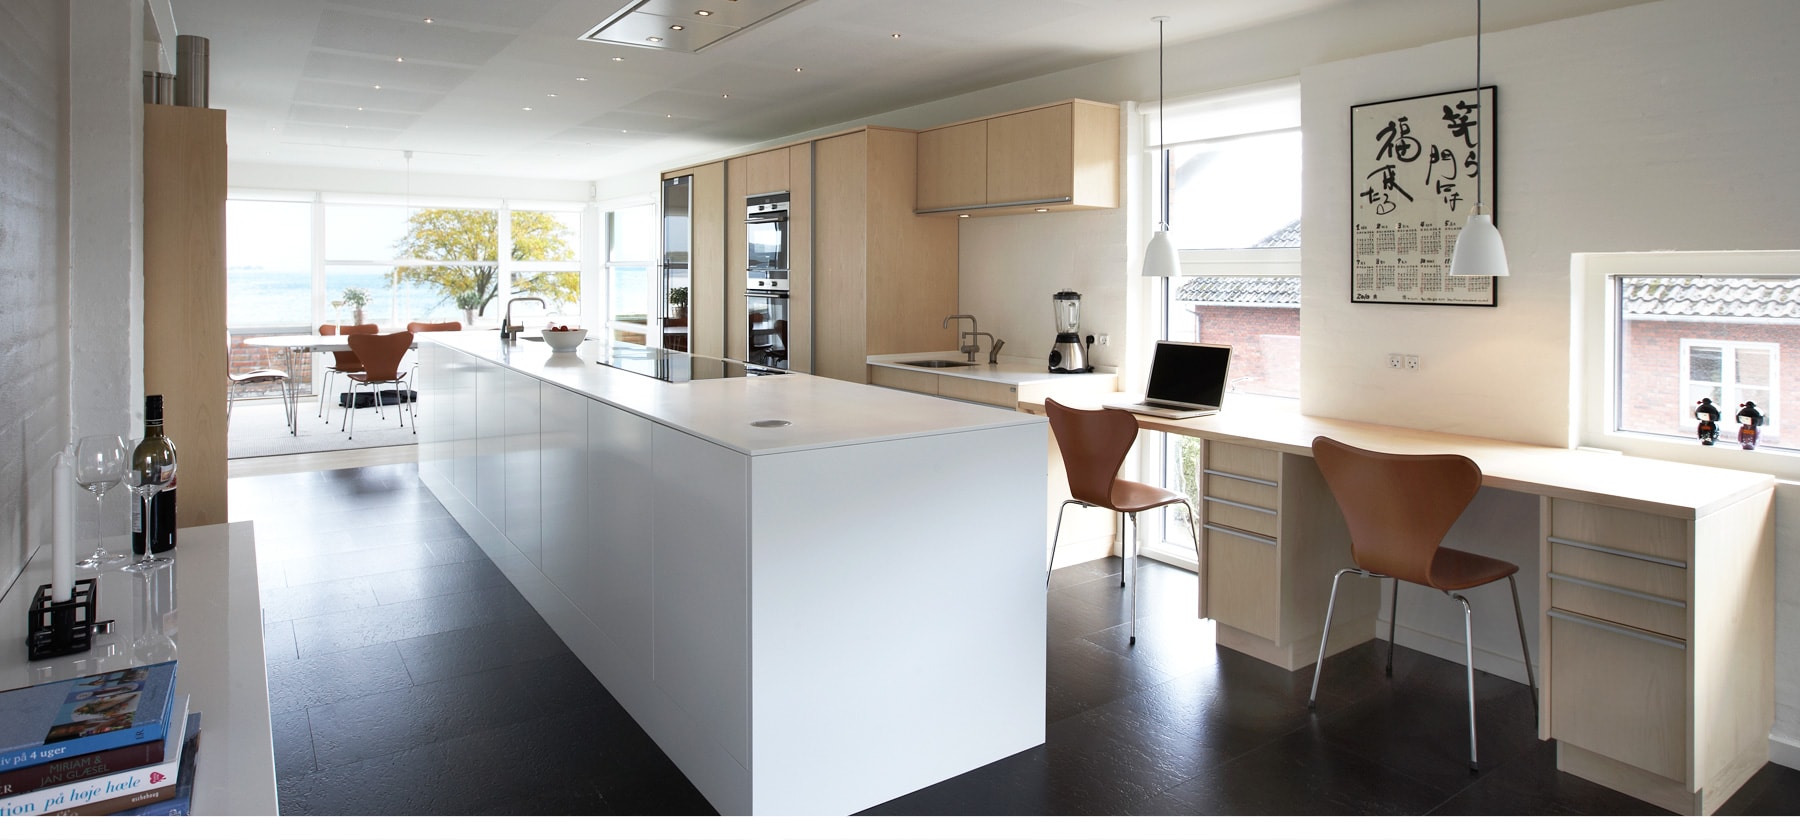 Exclusive Nordic kitchen designDAILY LUXURY <br> IN ALL ITS SIMPLICITY